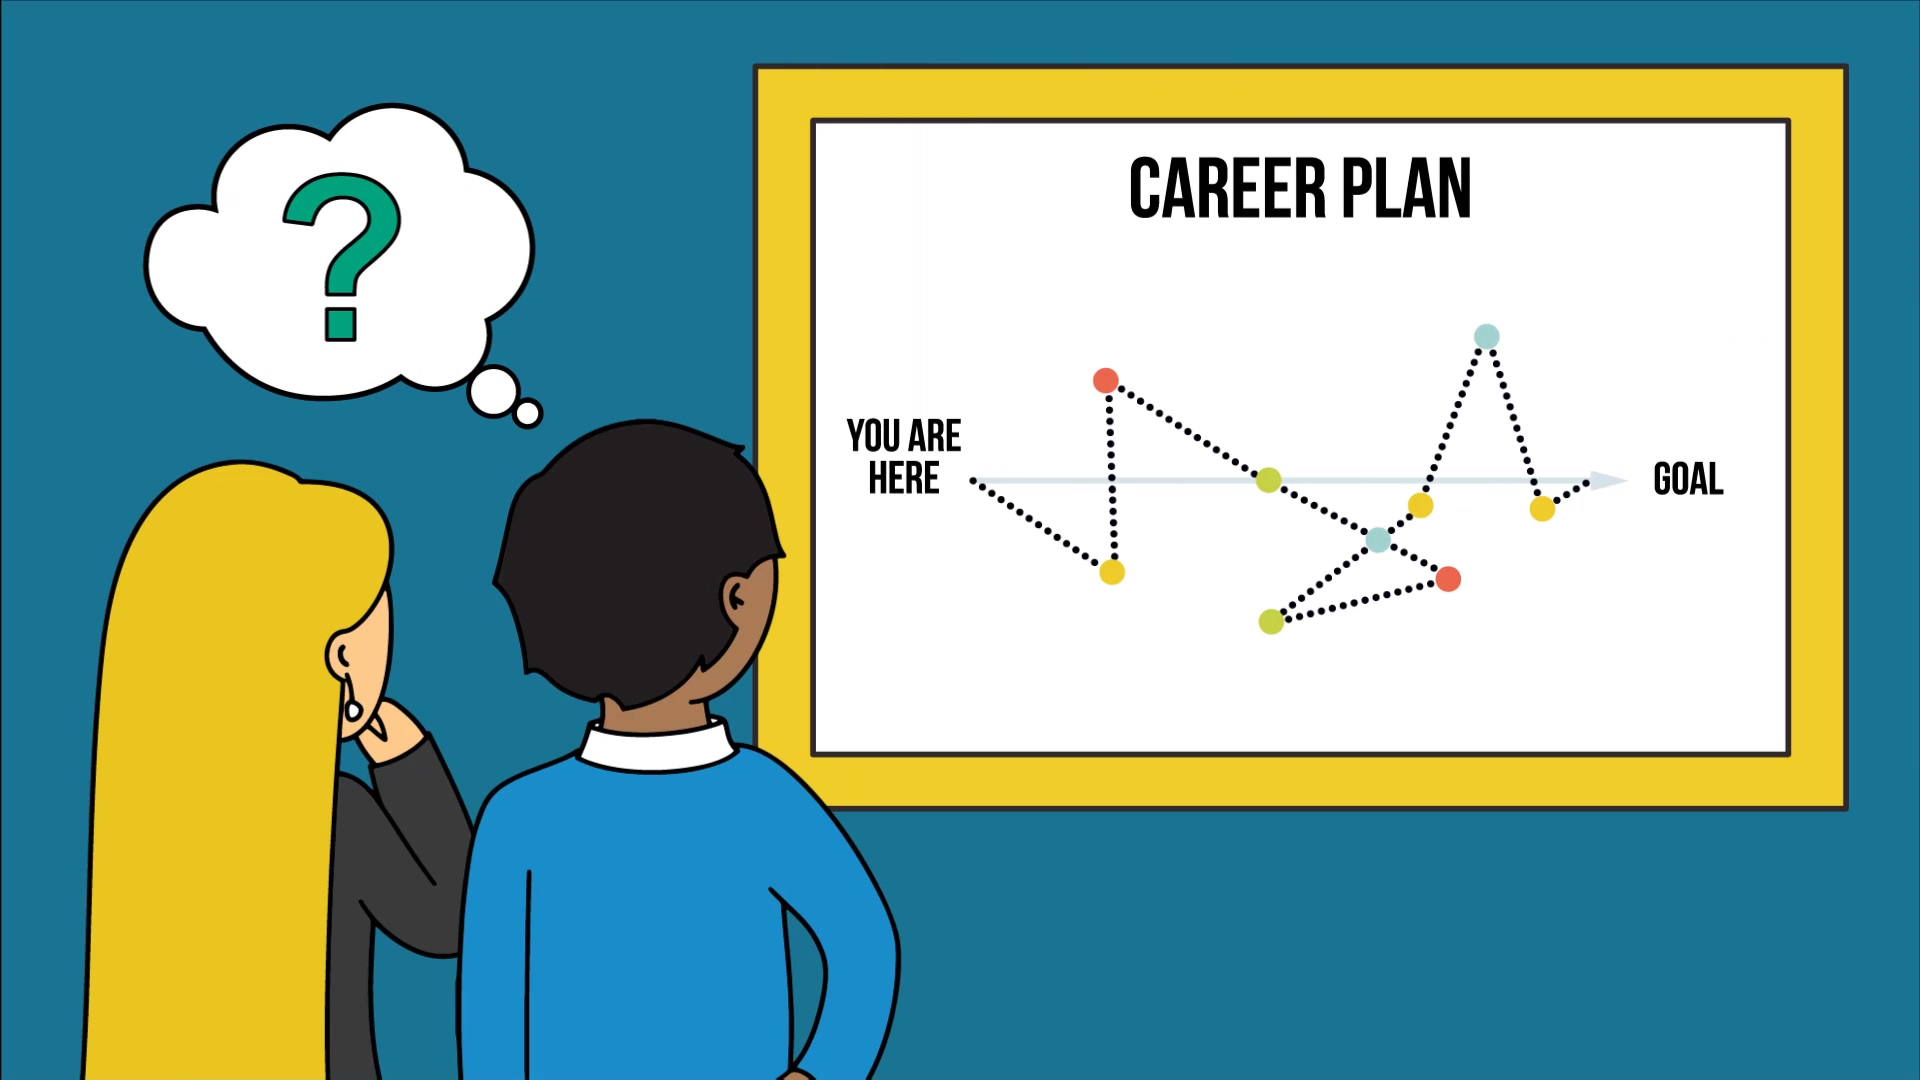 icon career plan on wall